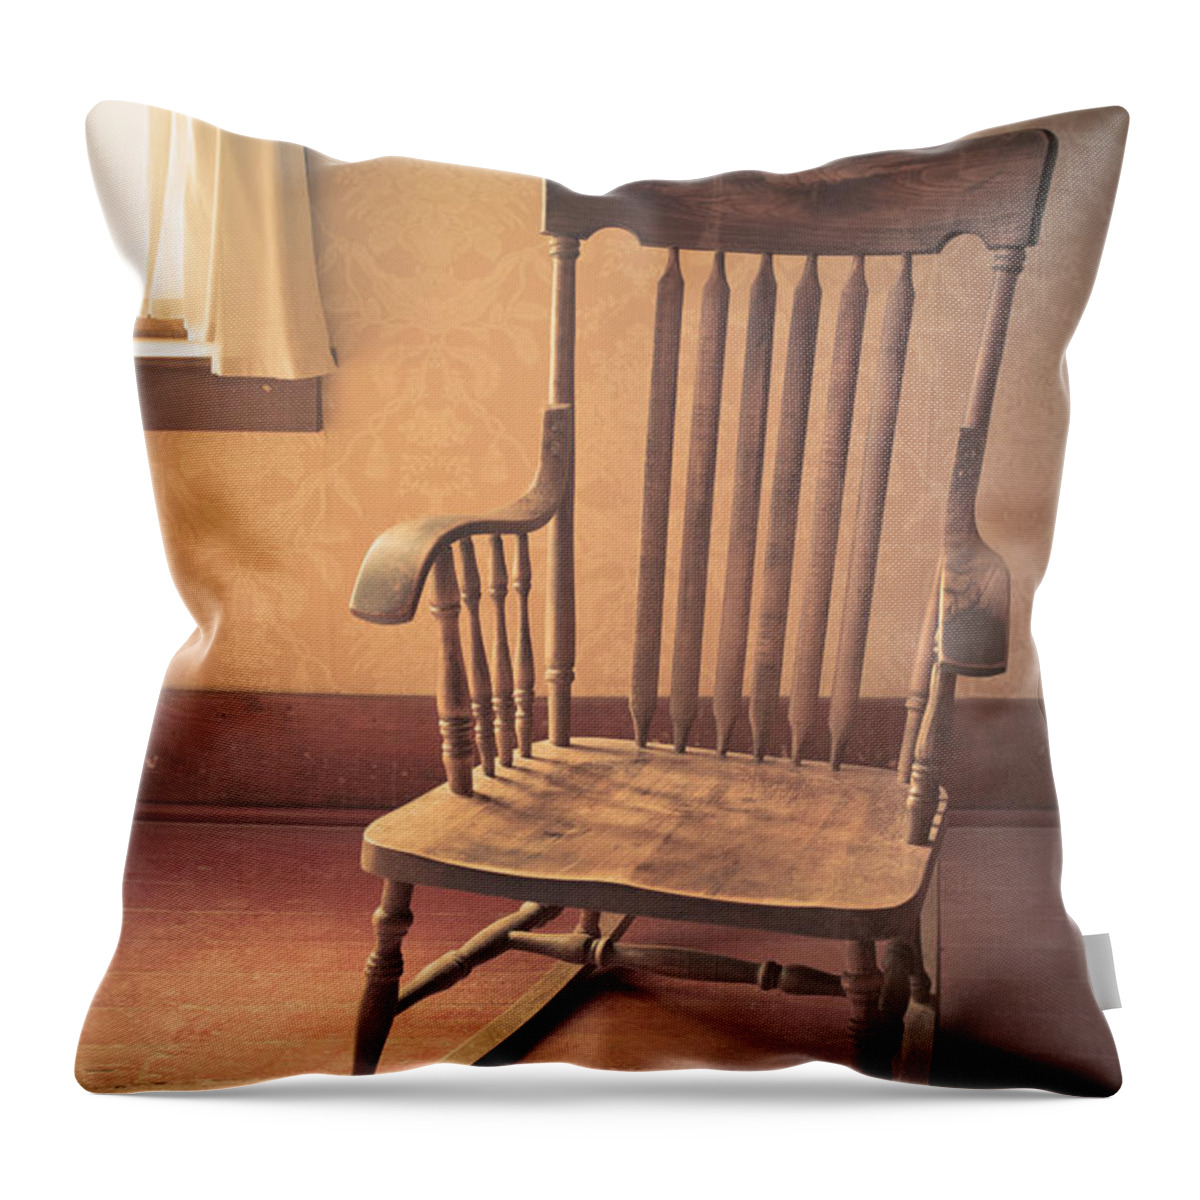 Rocking Throw Pillow featuring the photograph Old wooden rocking chair by Edward Fielding